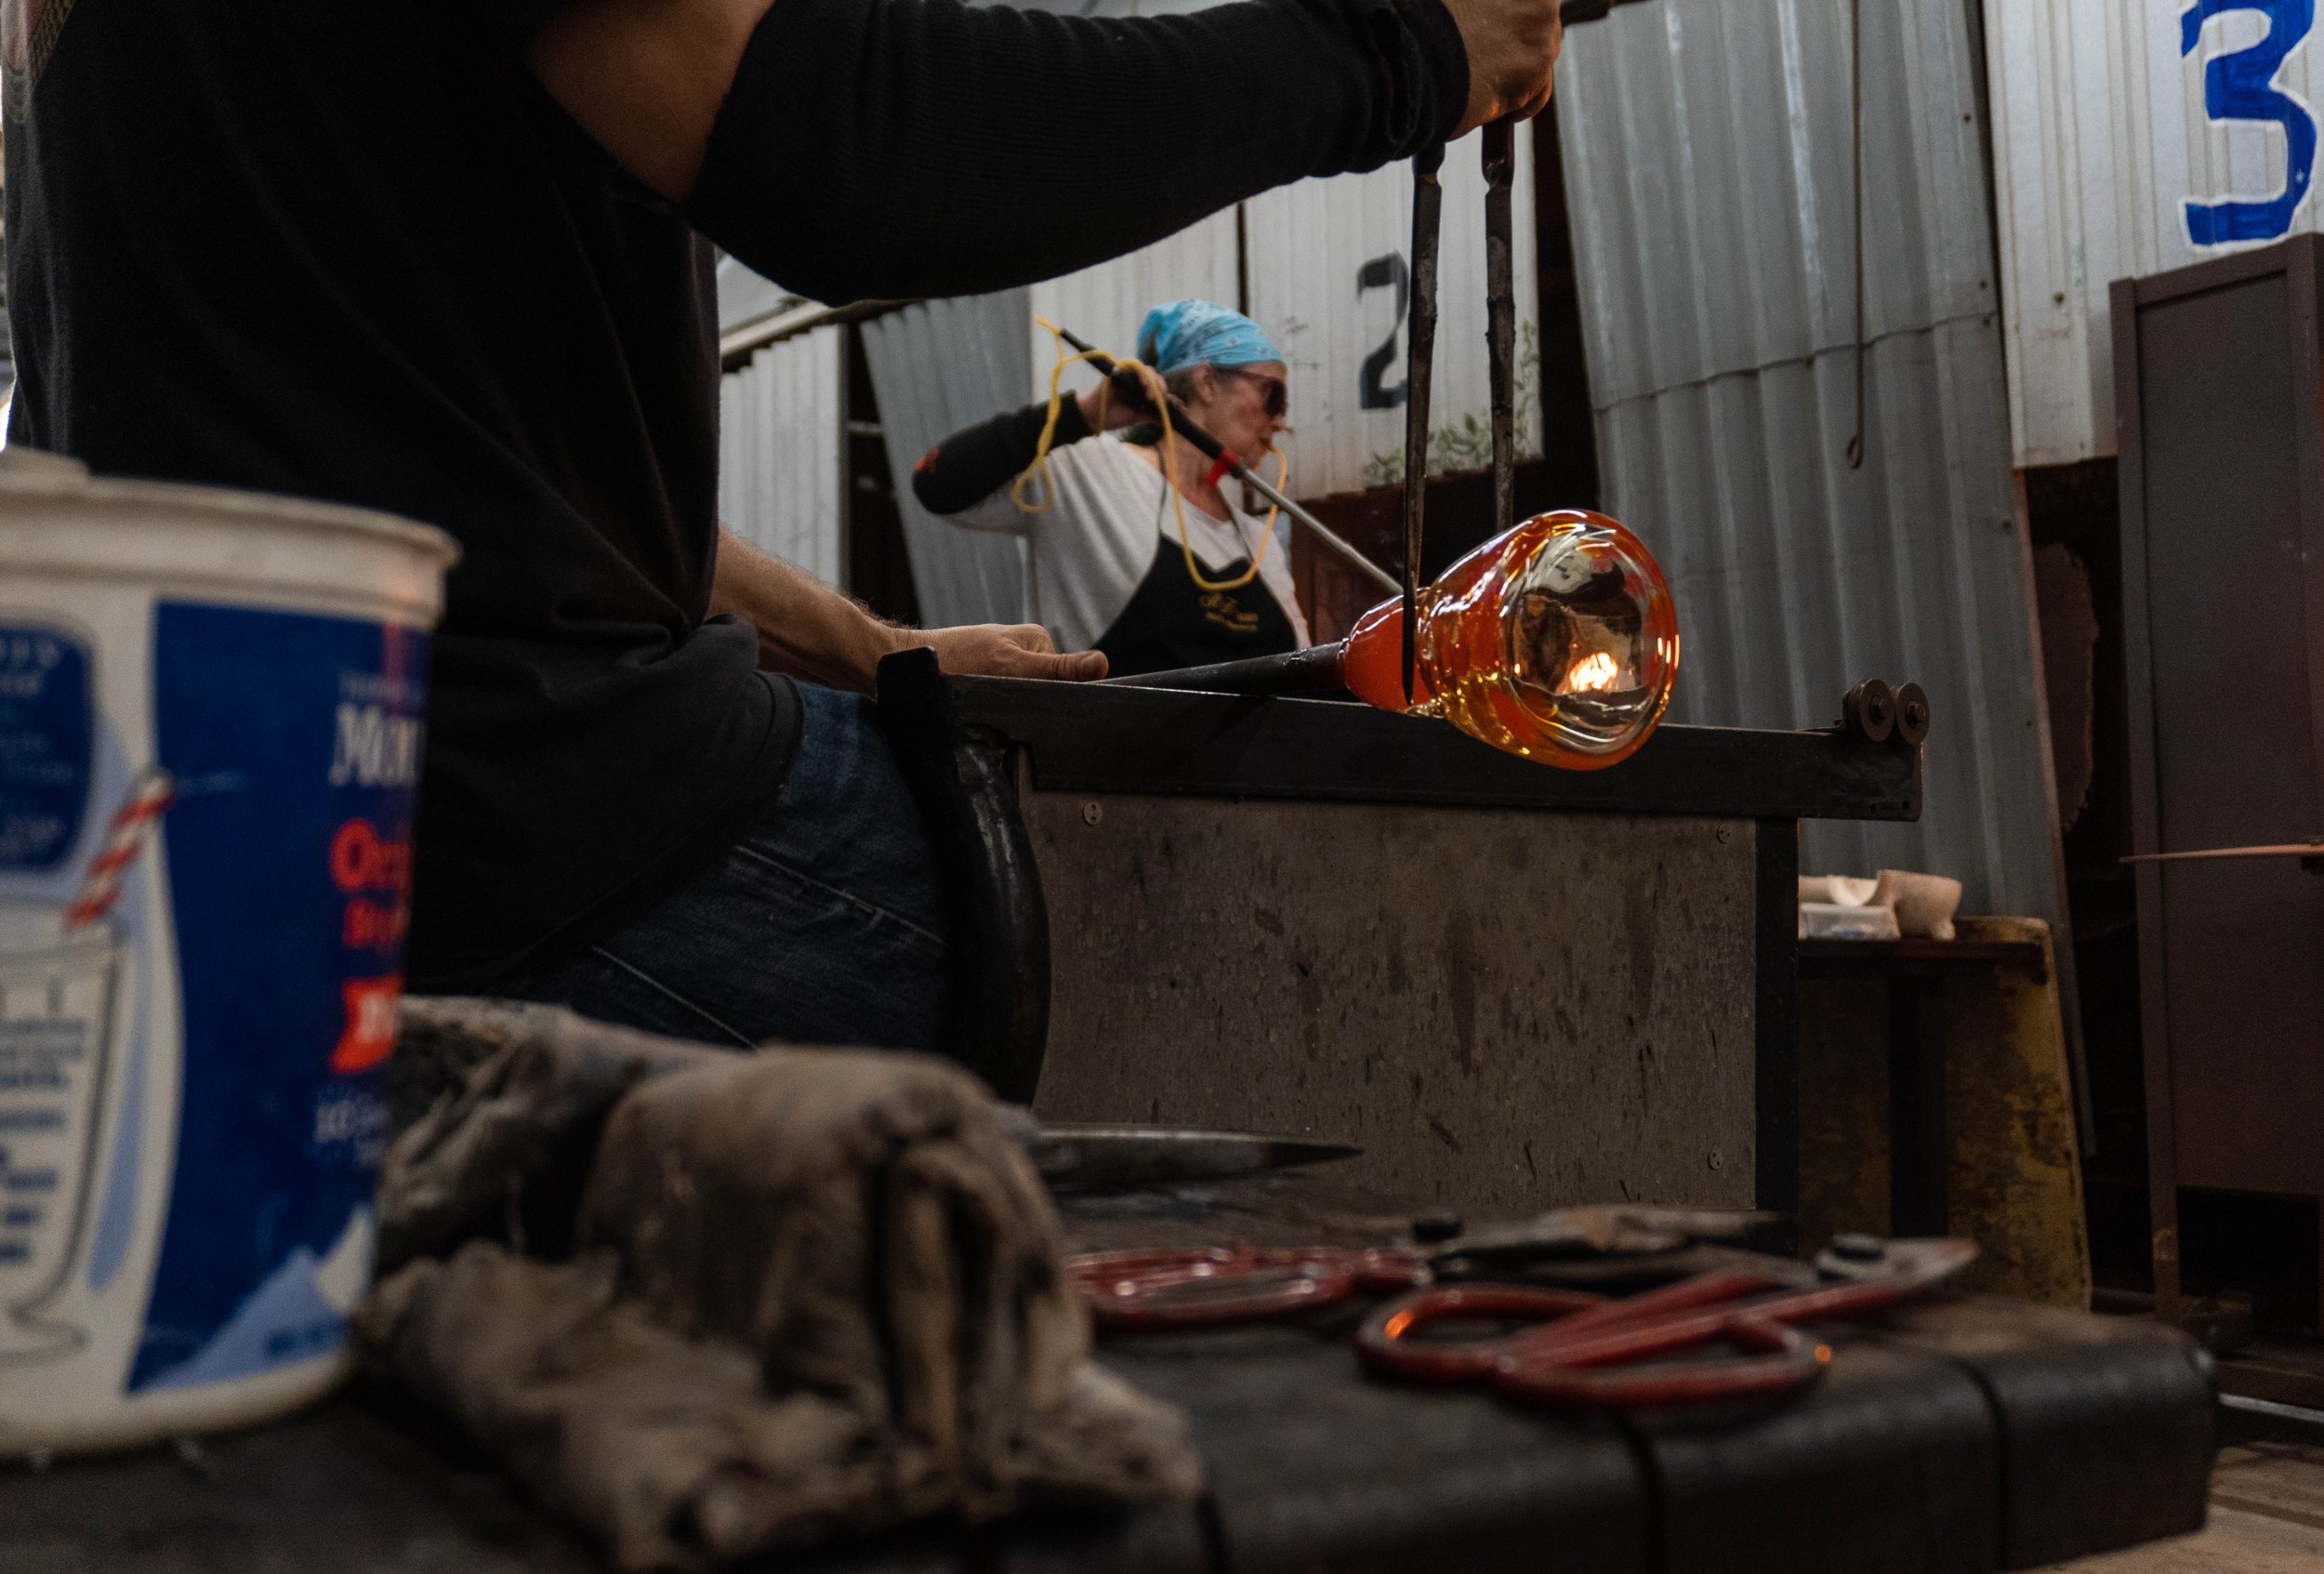  Dave Gaeta joined the Glass Sculpting class 6 weeks ago and is currently working on his in-class assignment to create a bowl. In the background, student Alexis Daniels stands by the furnace and blows into her blowpipe. Glass Sculpturing classes can 